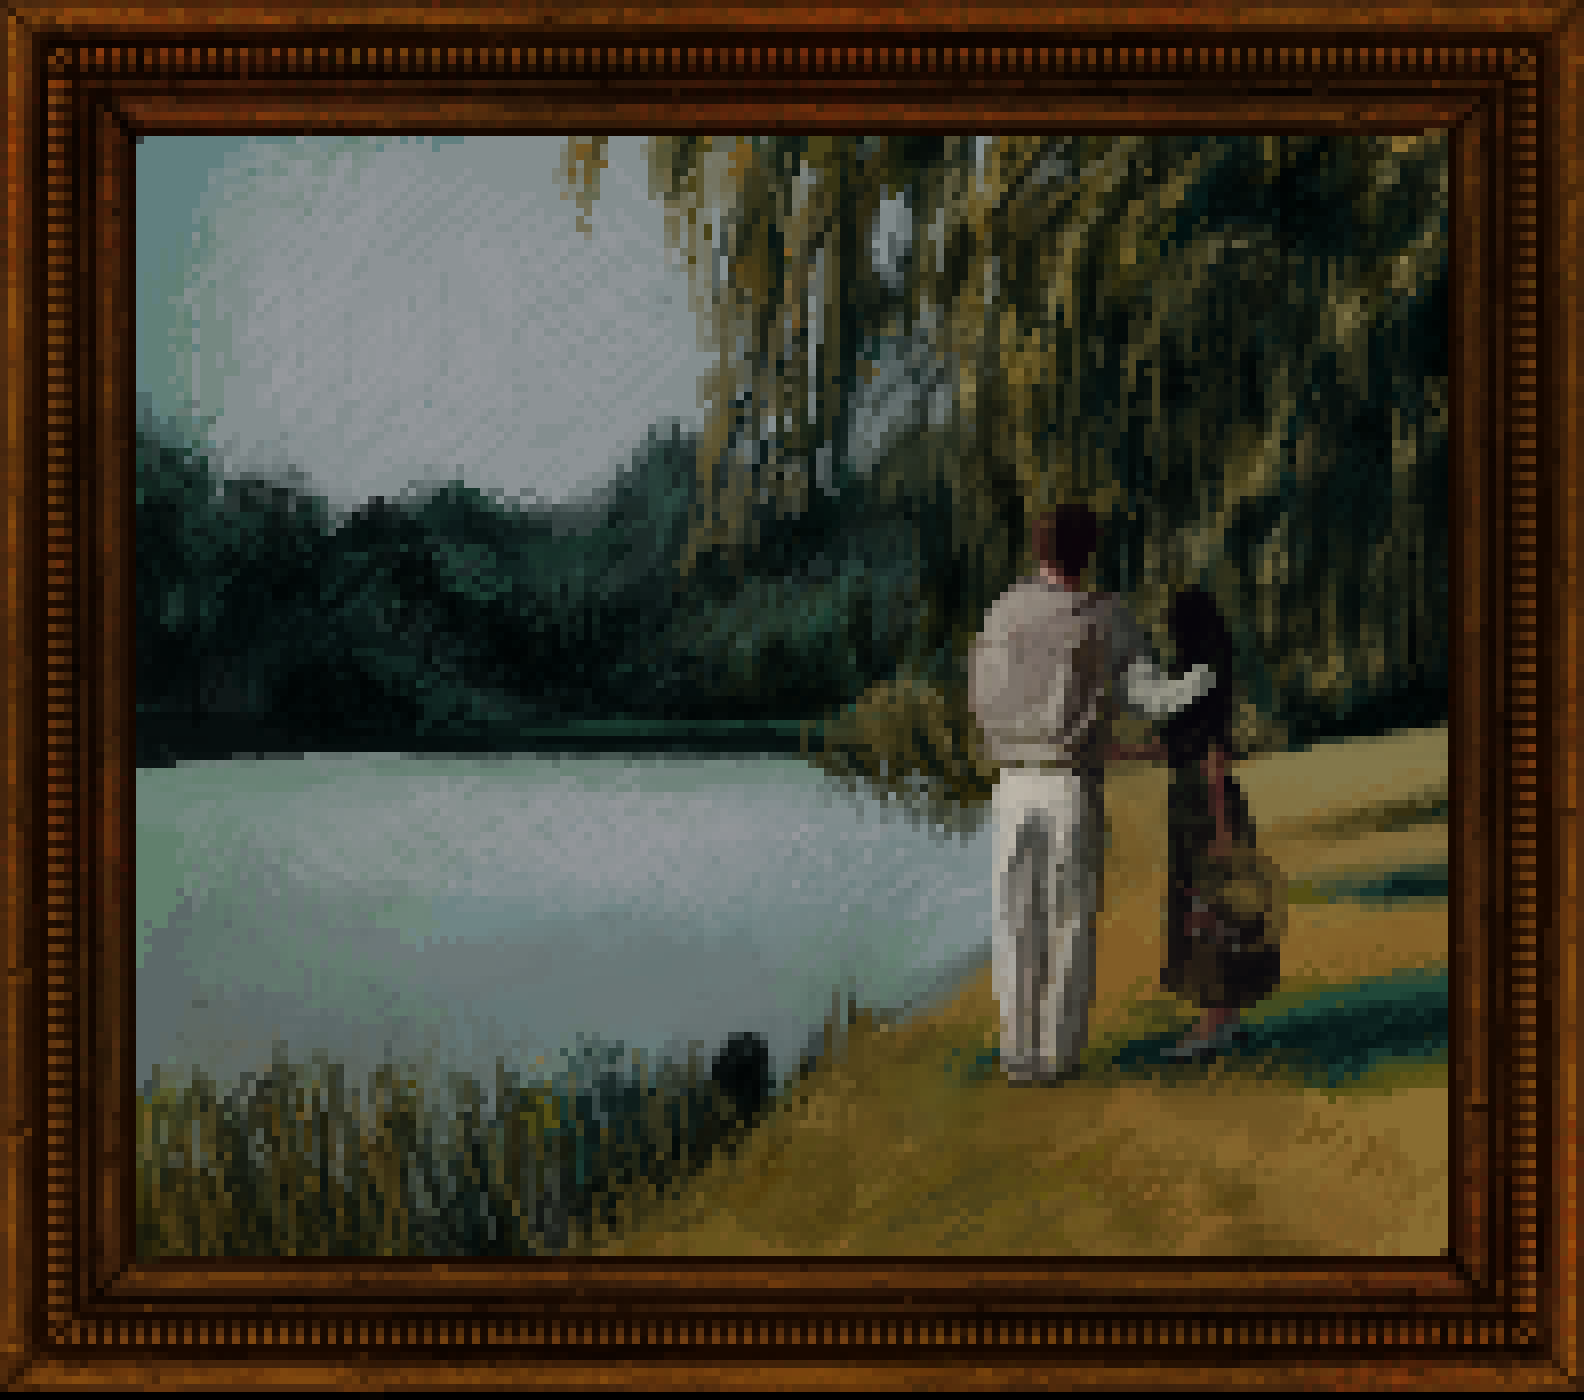 similar pixel art to the last painting but now the couple isn't facing the viewer and the man has his arm around the woman's shoulder